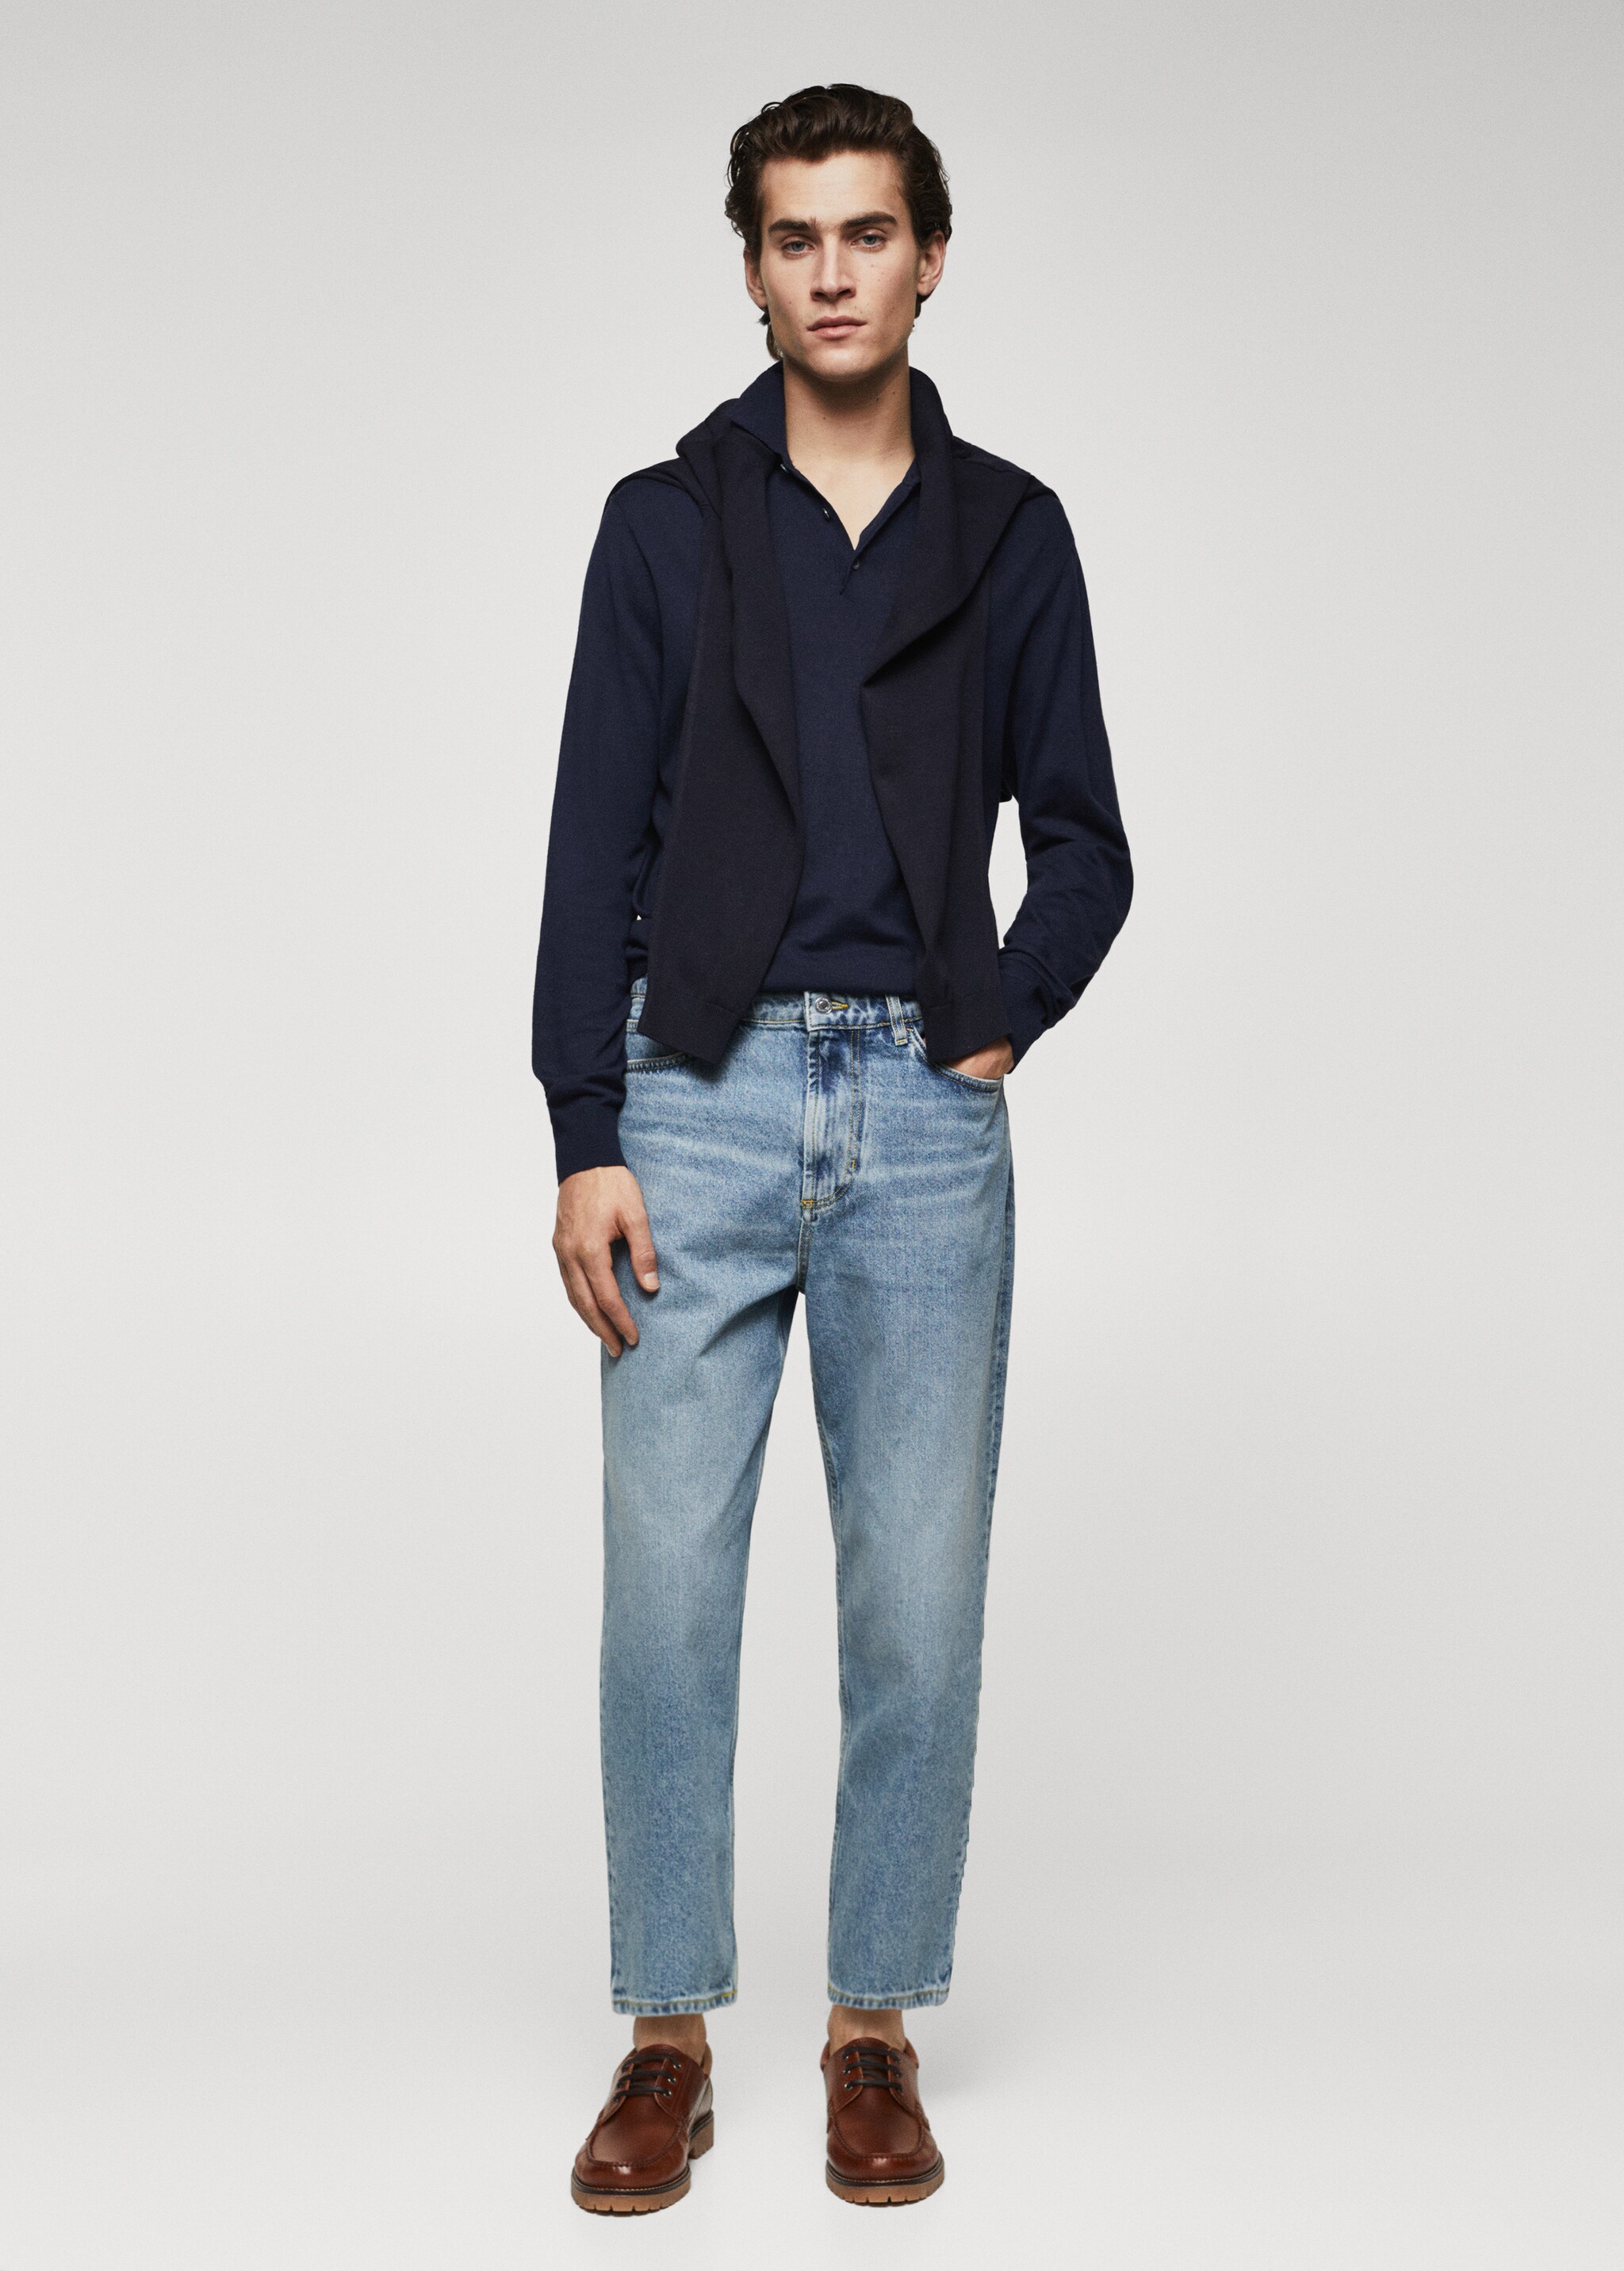 Tapered loose cropped jeans - General plane